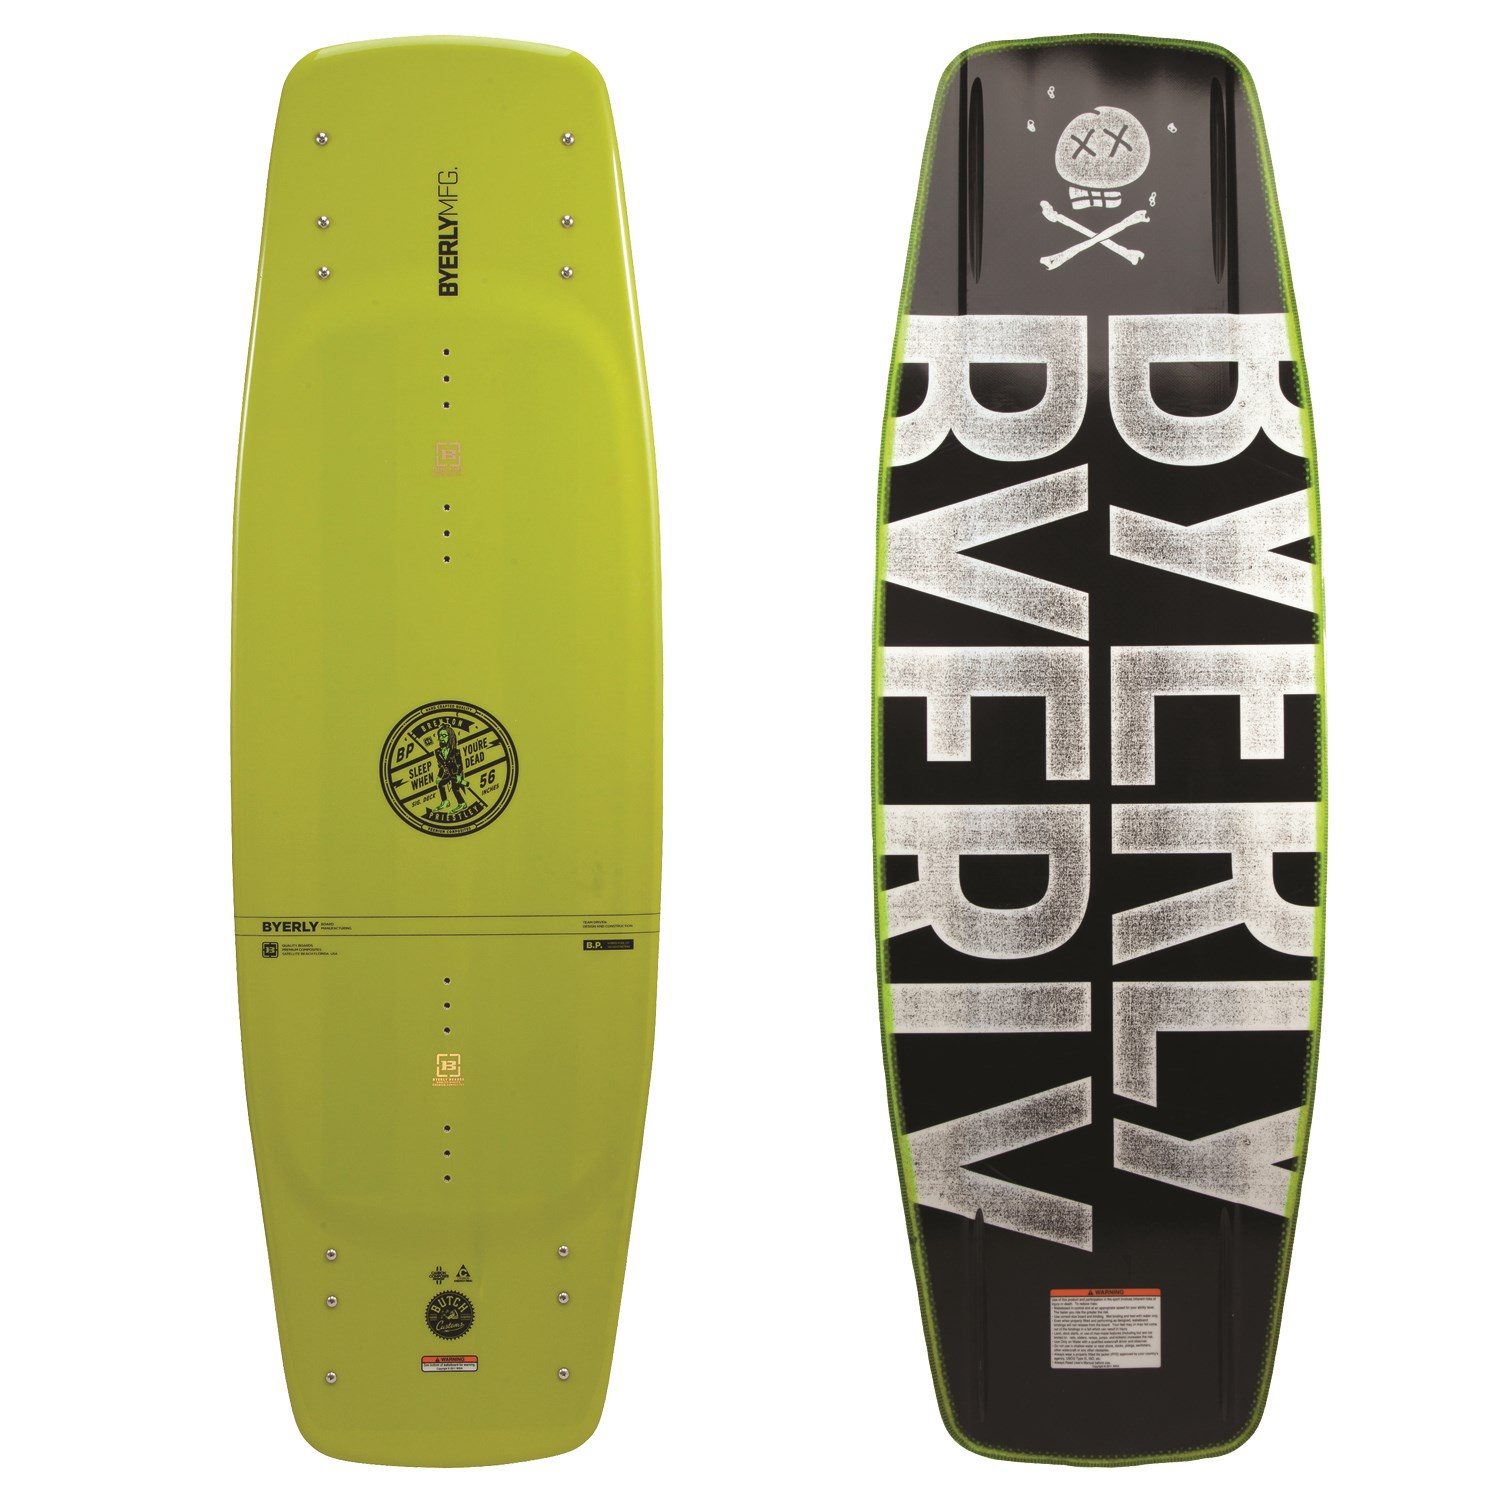 2018 Byerly Brigade Boat Wakeboard 